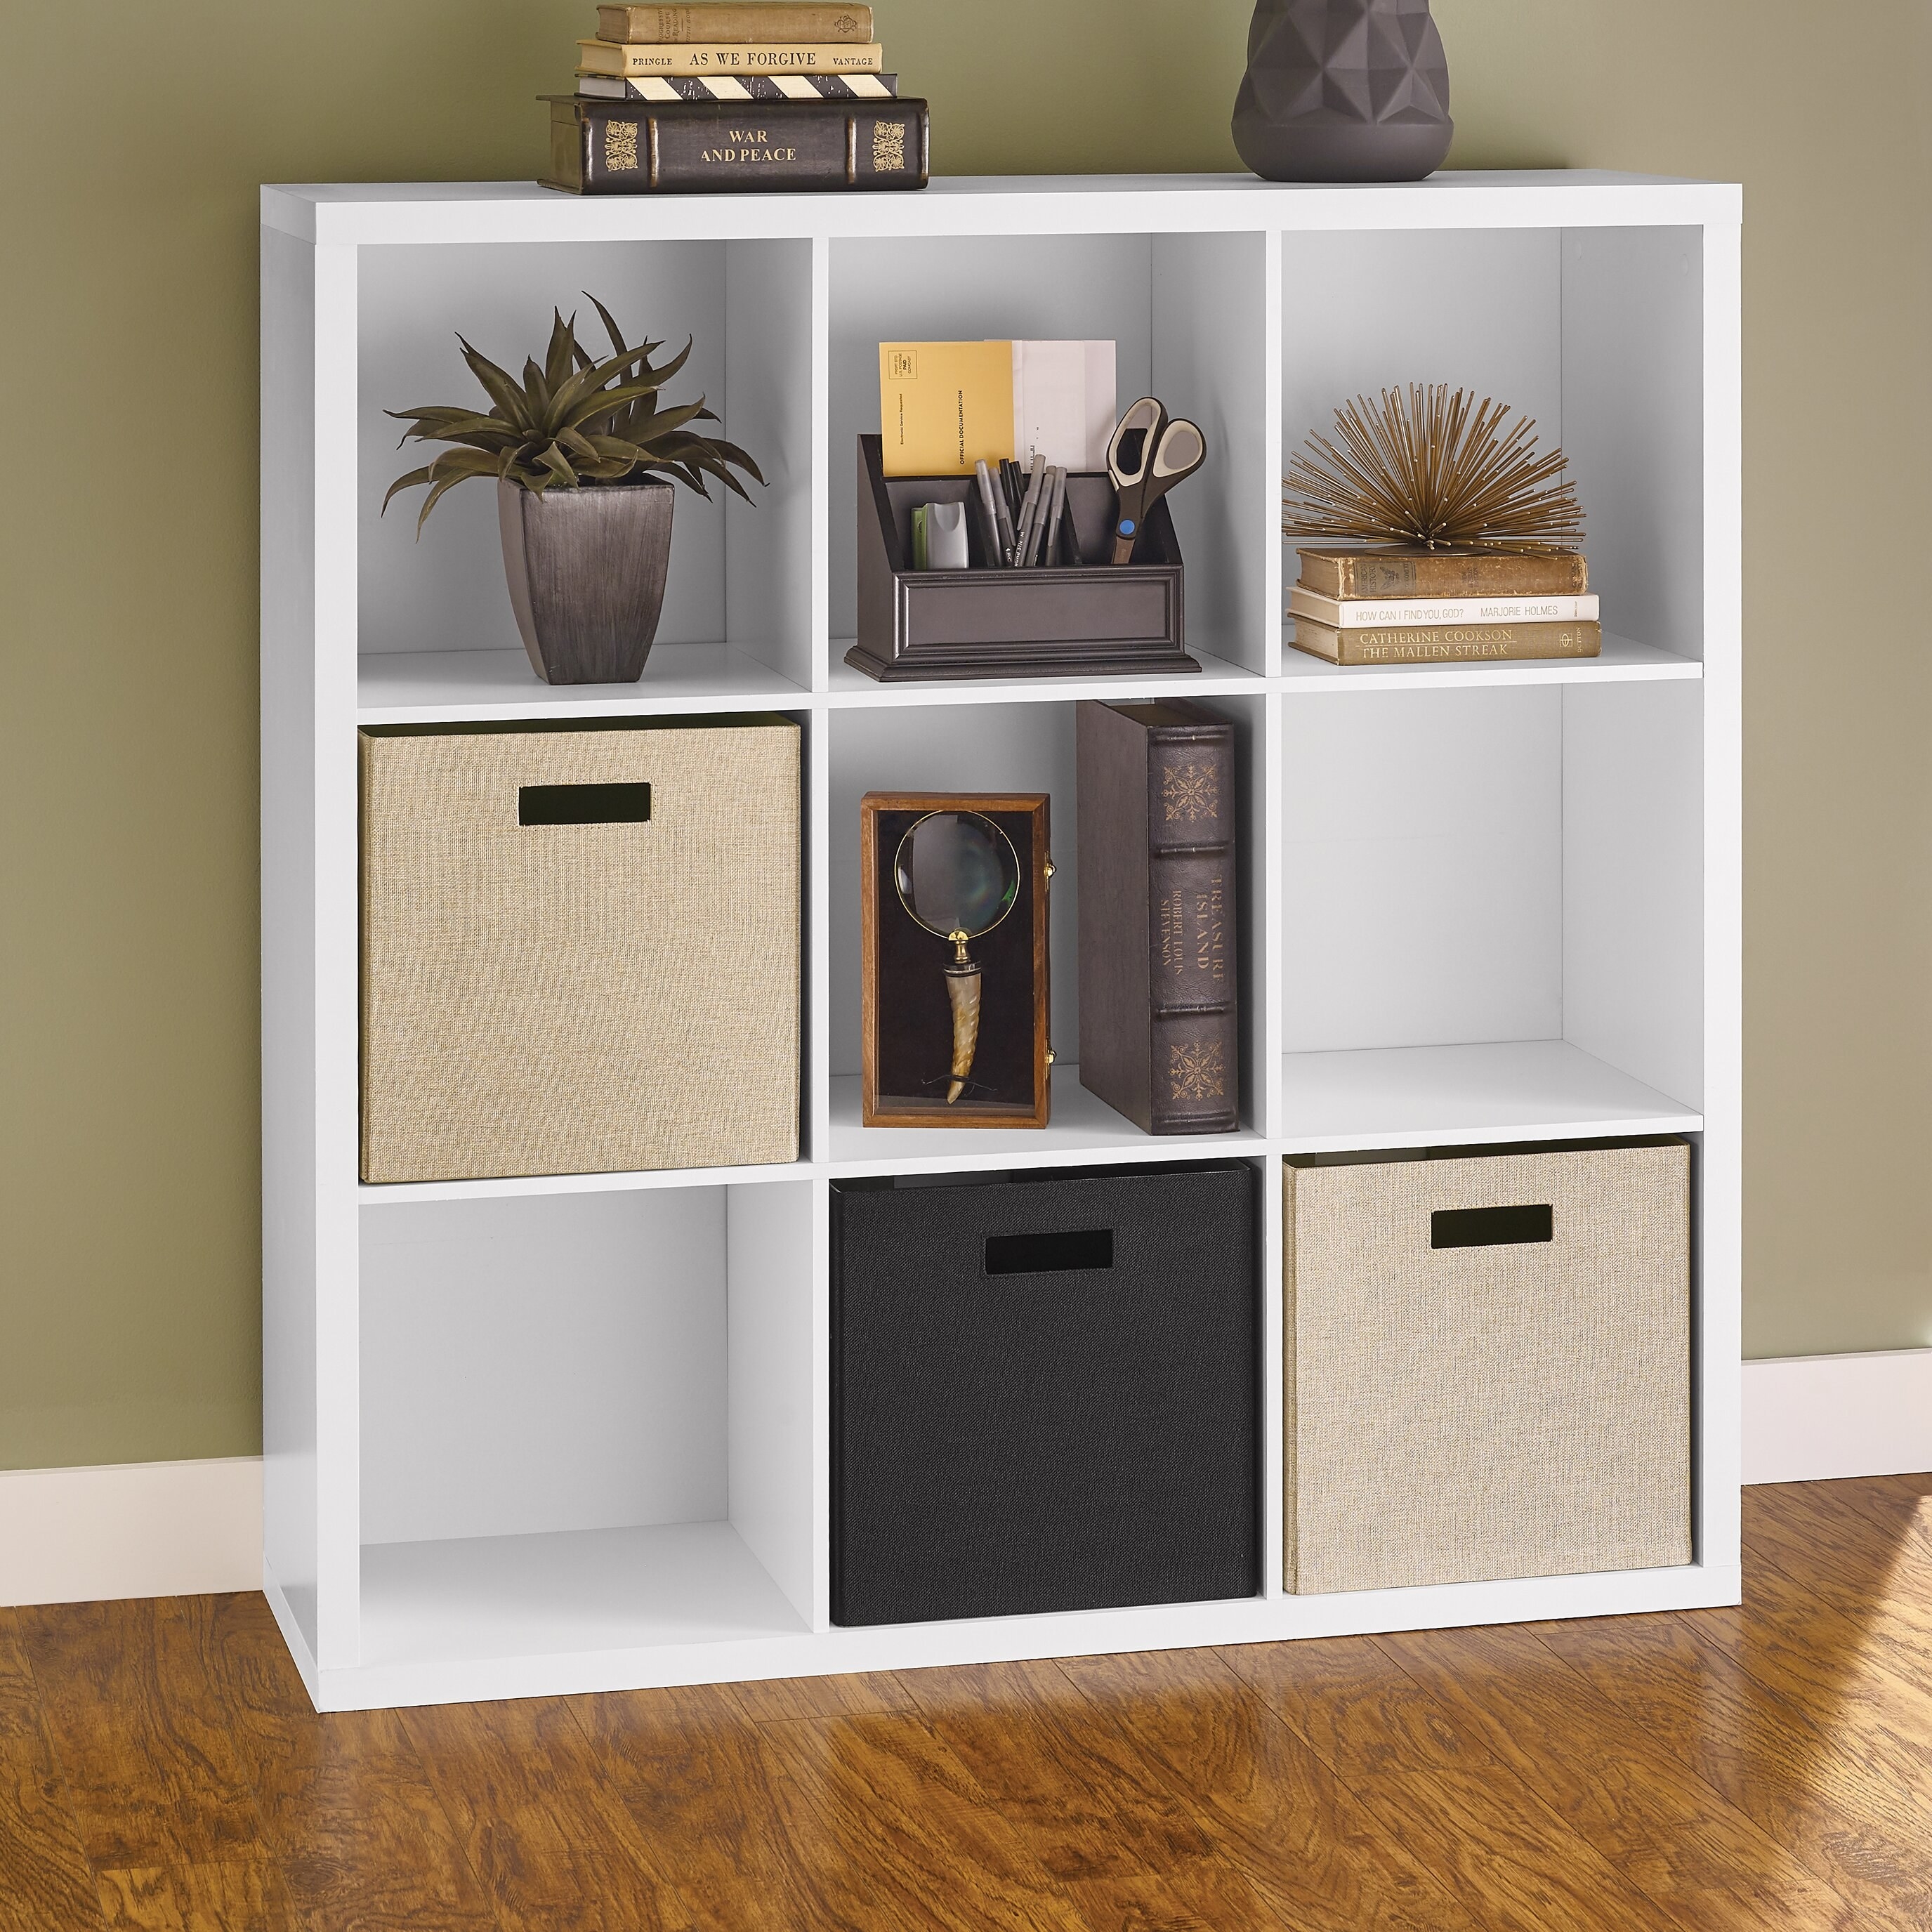 The storage bookcase with nine cubbies in white